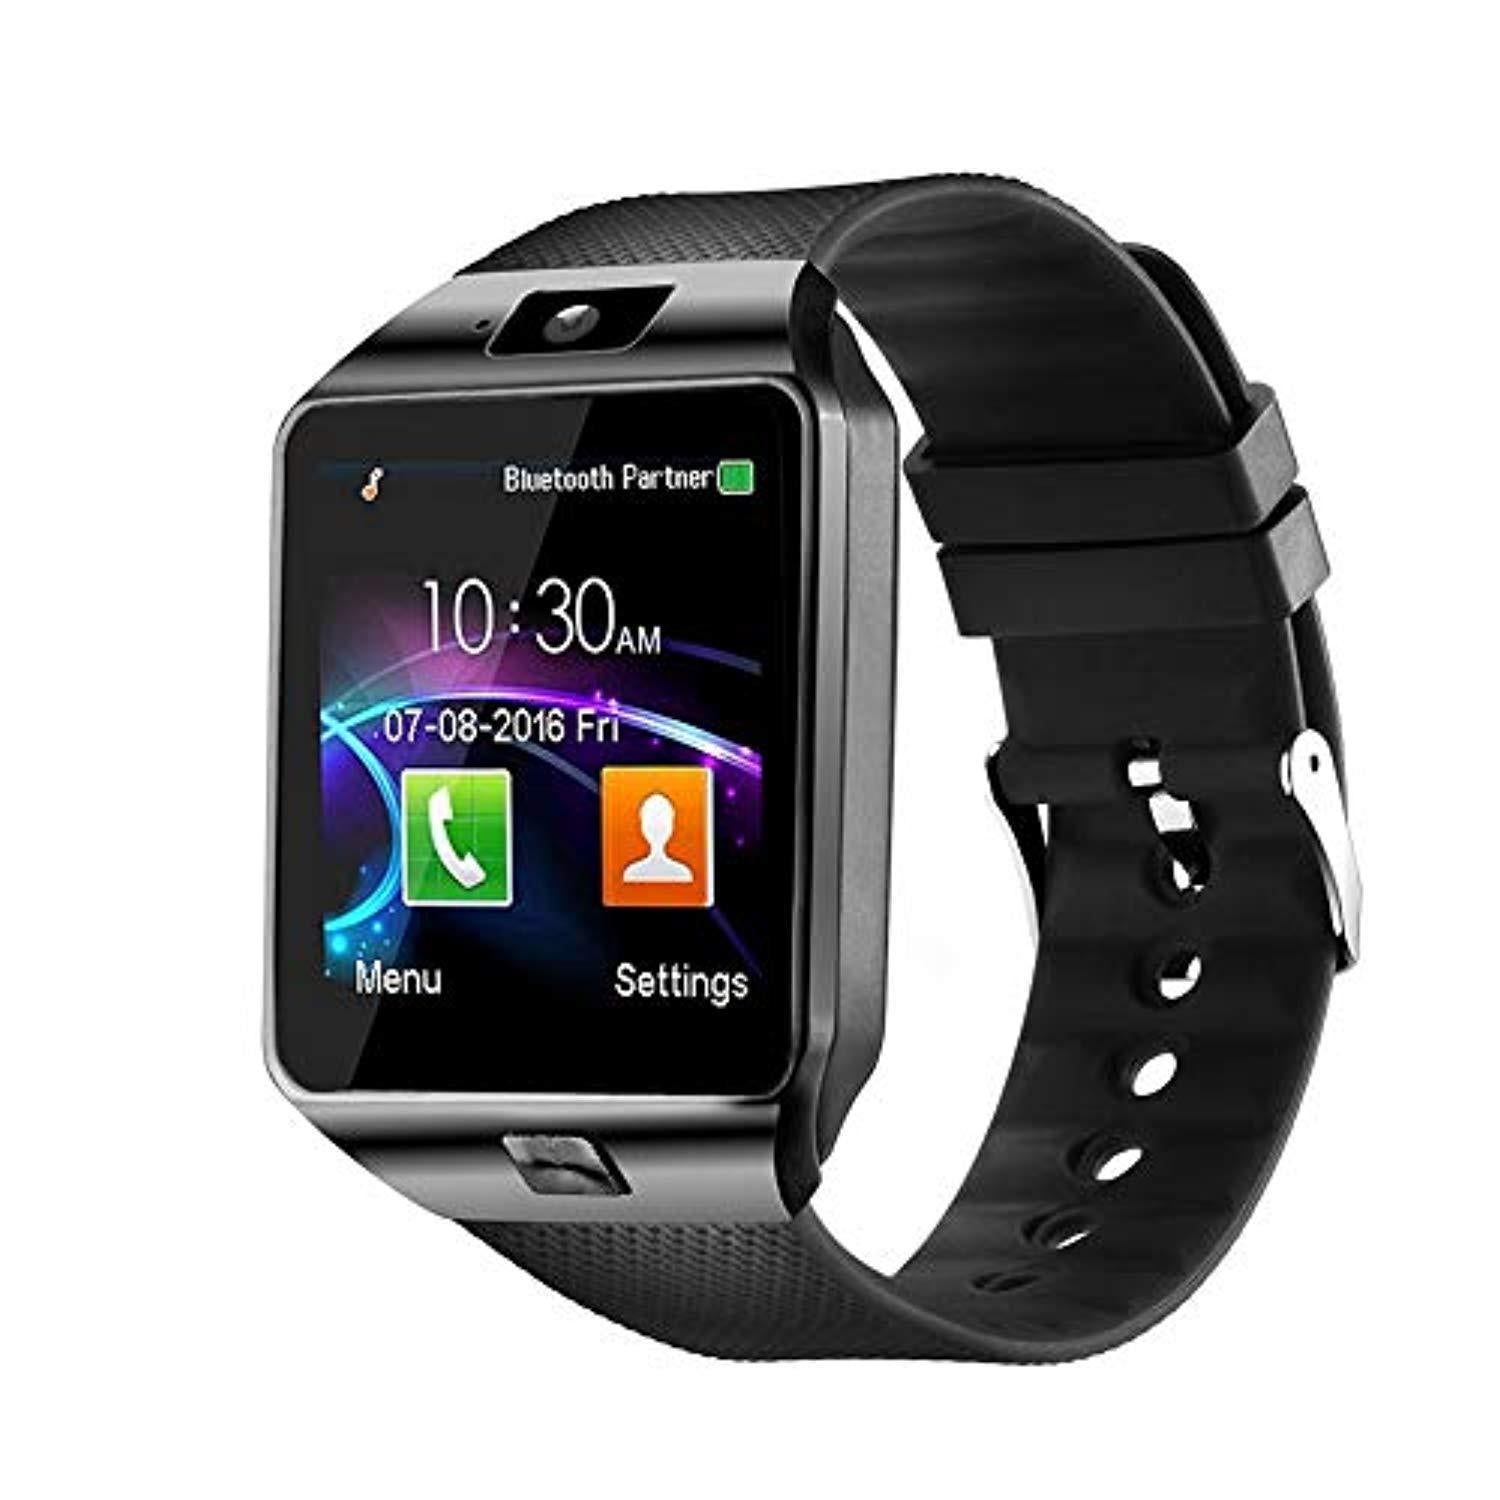 Bluetooth Smart Watch Dz09 Smartwatch GSM Sim Card with Camera for Android iOS Black